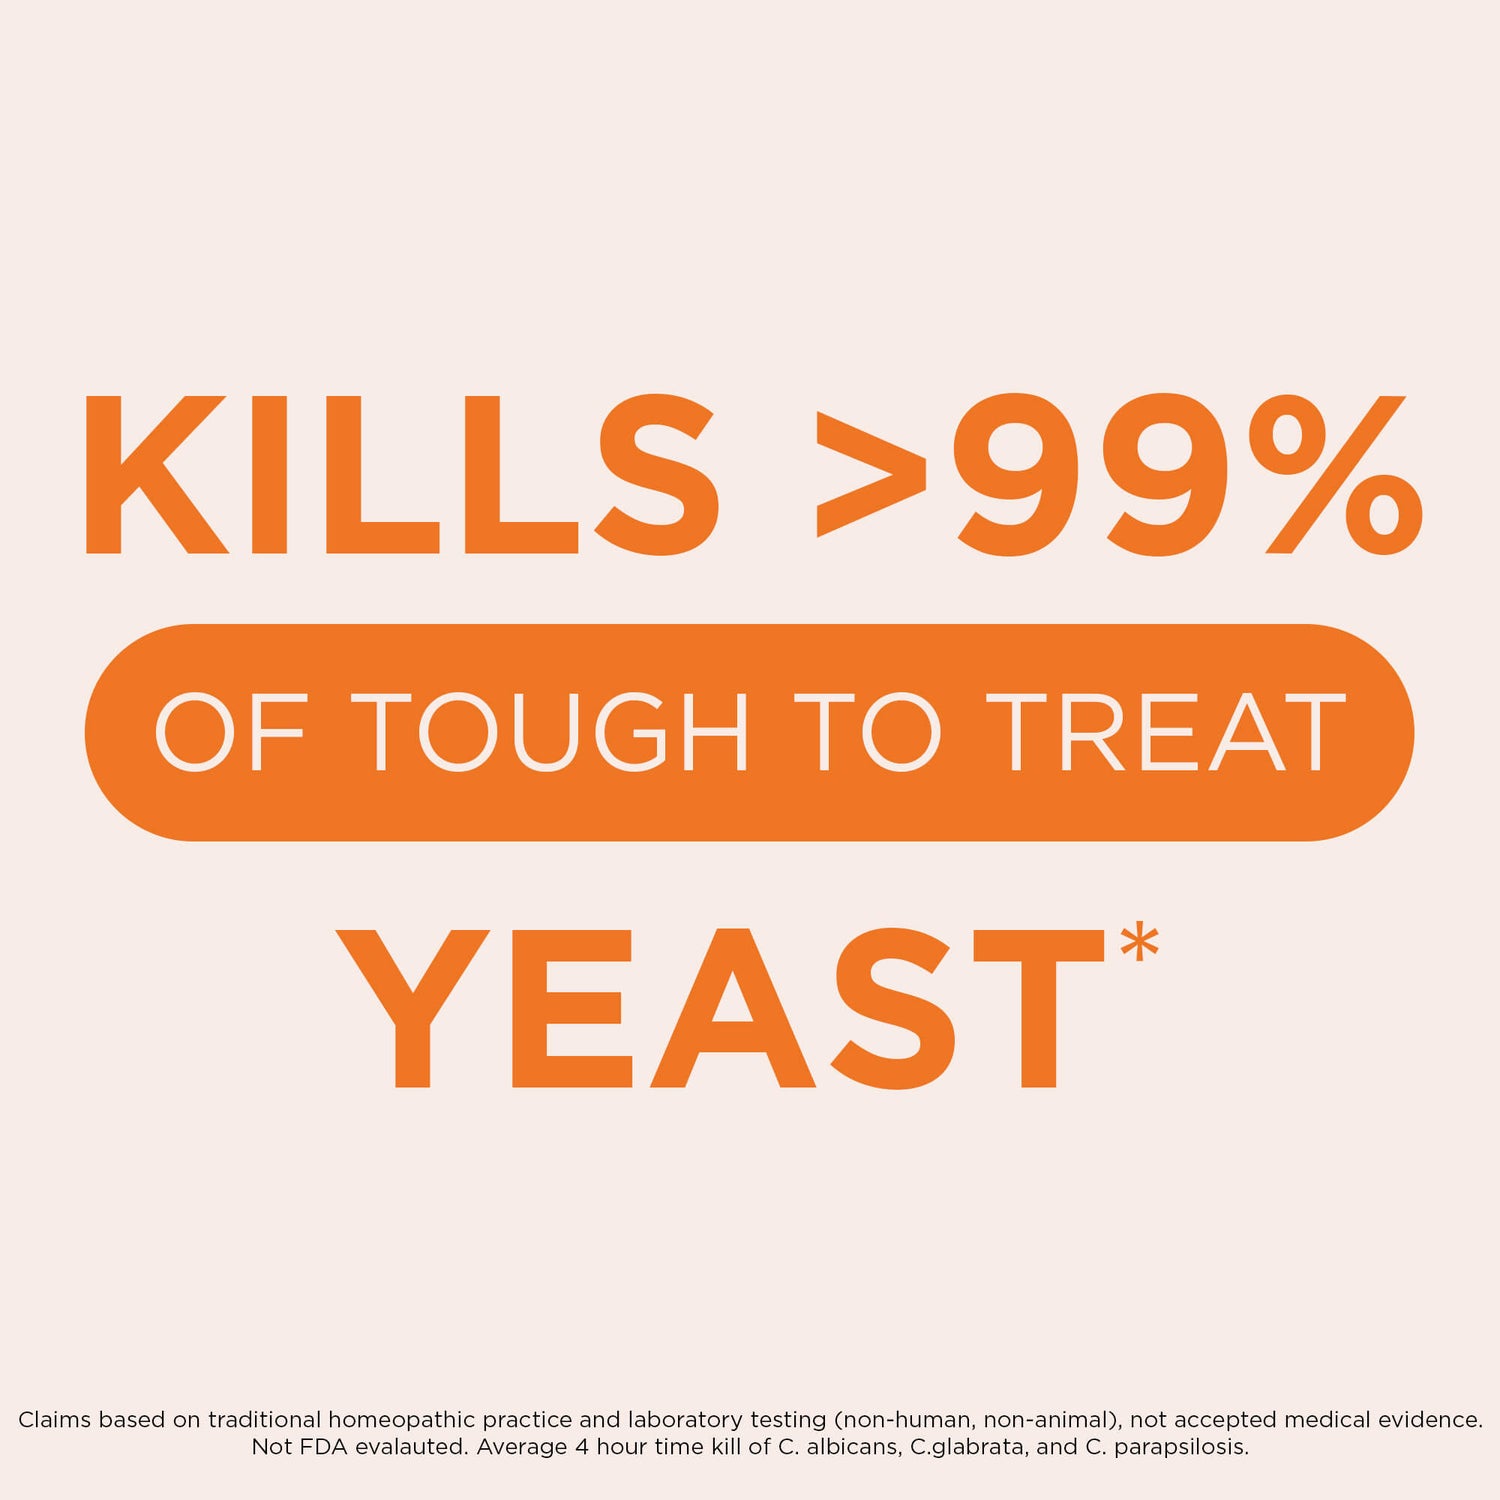 Kills more than 99% of tough to treat yeast